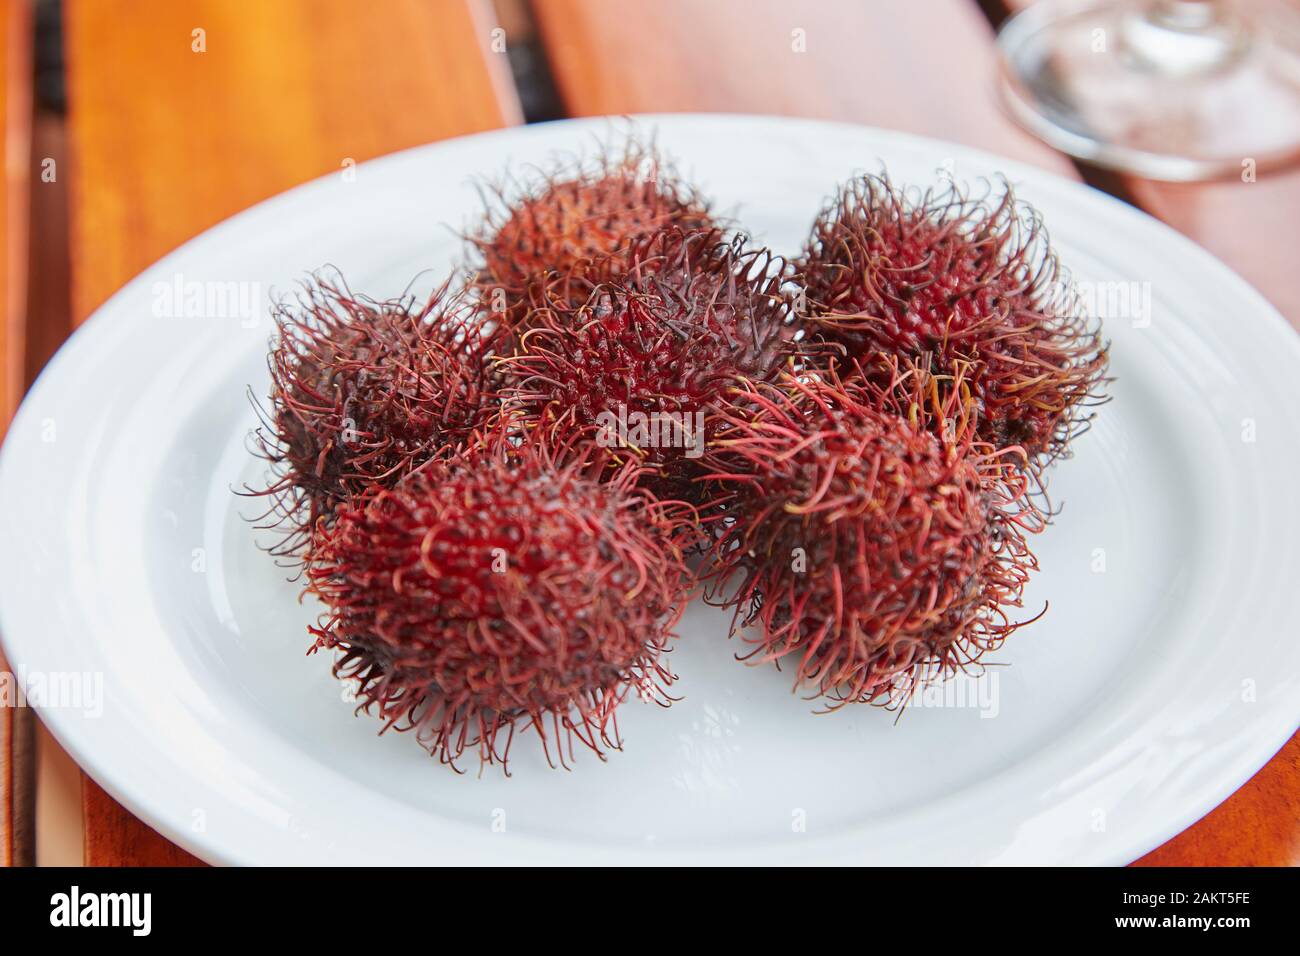 A plate of Rambutans, a spiky red fruit. Stock Photo